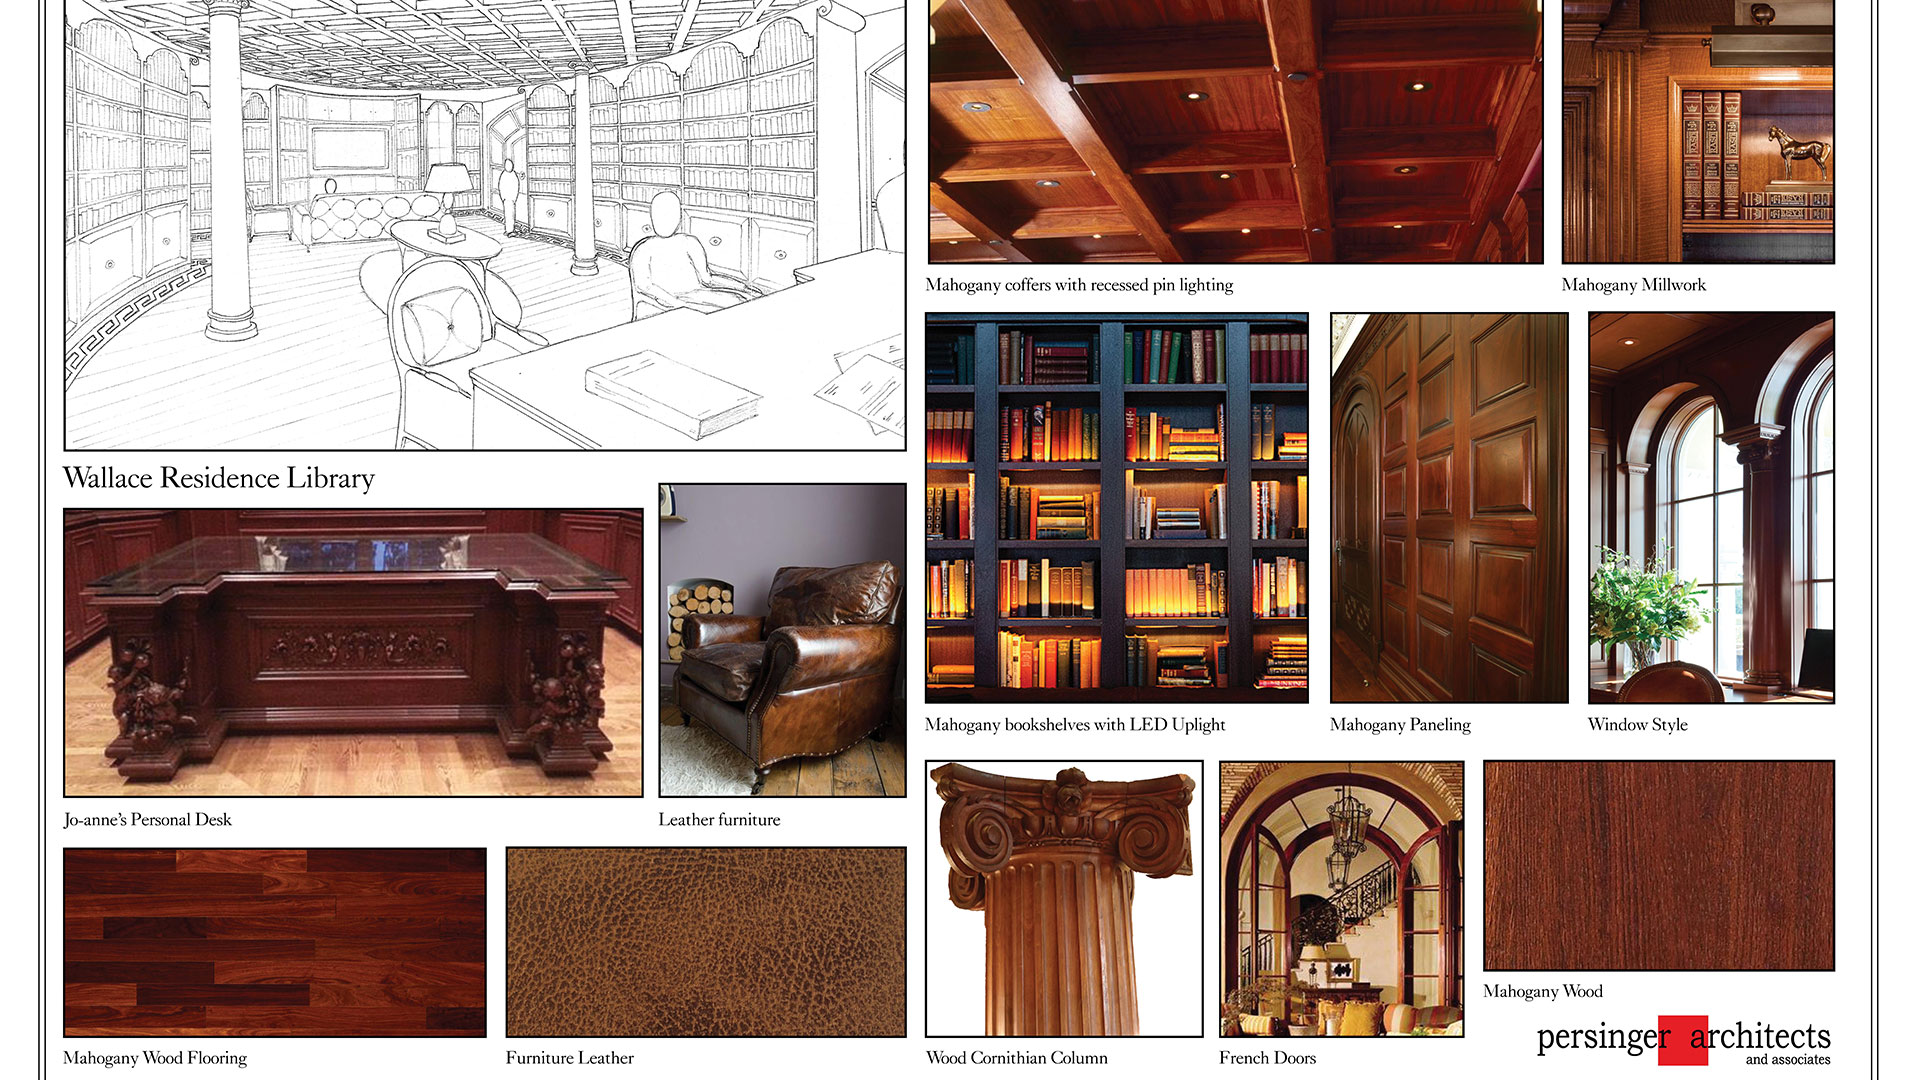 Compilation of images and ideas highlighting bookshelves, exposed wood, panel ceilings, and roman-style columns.